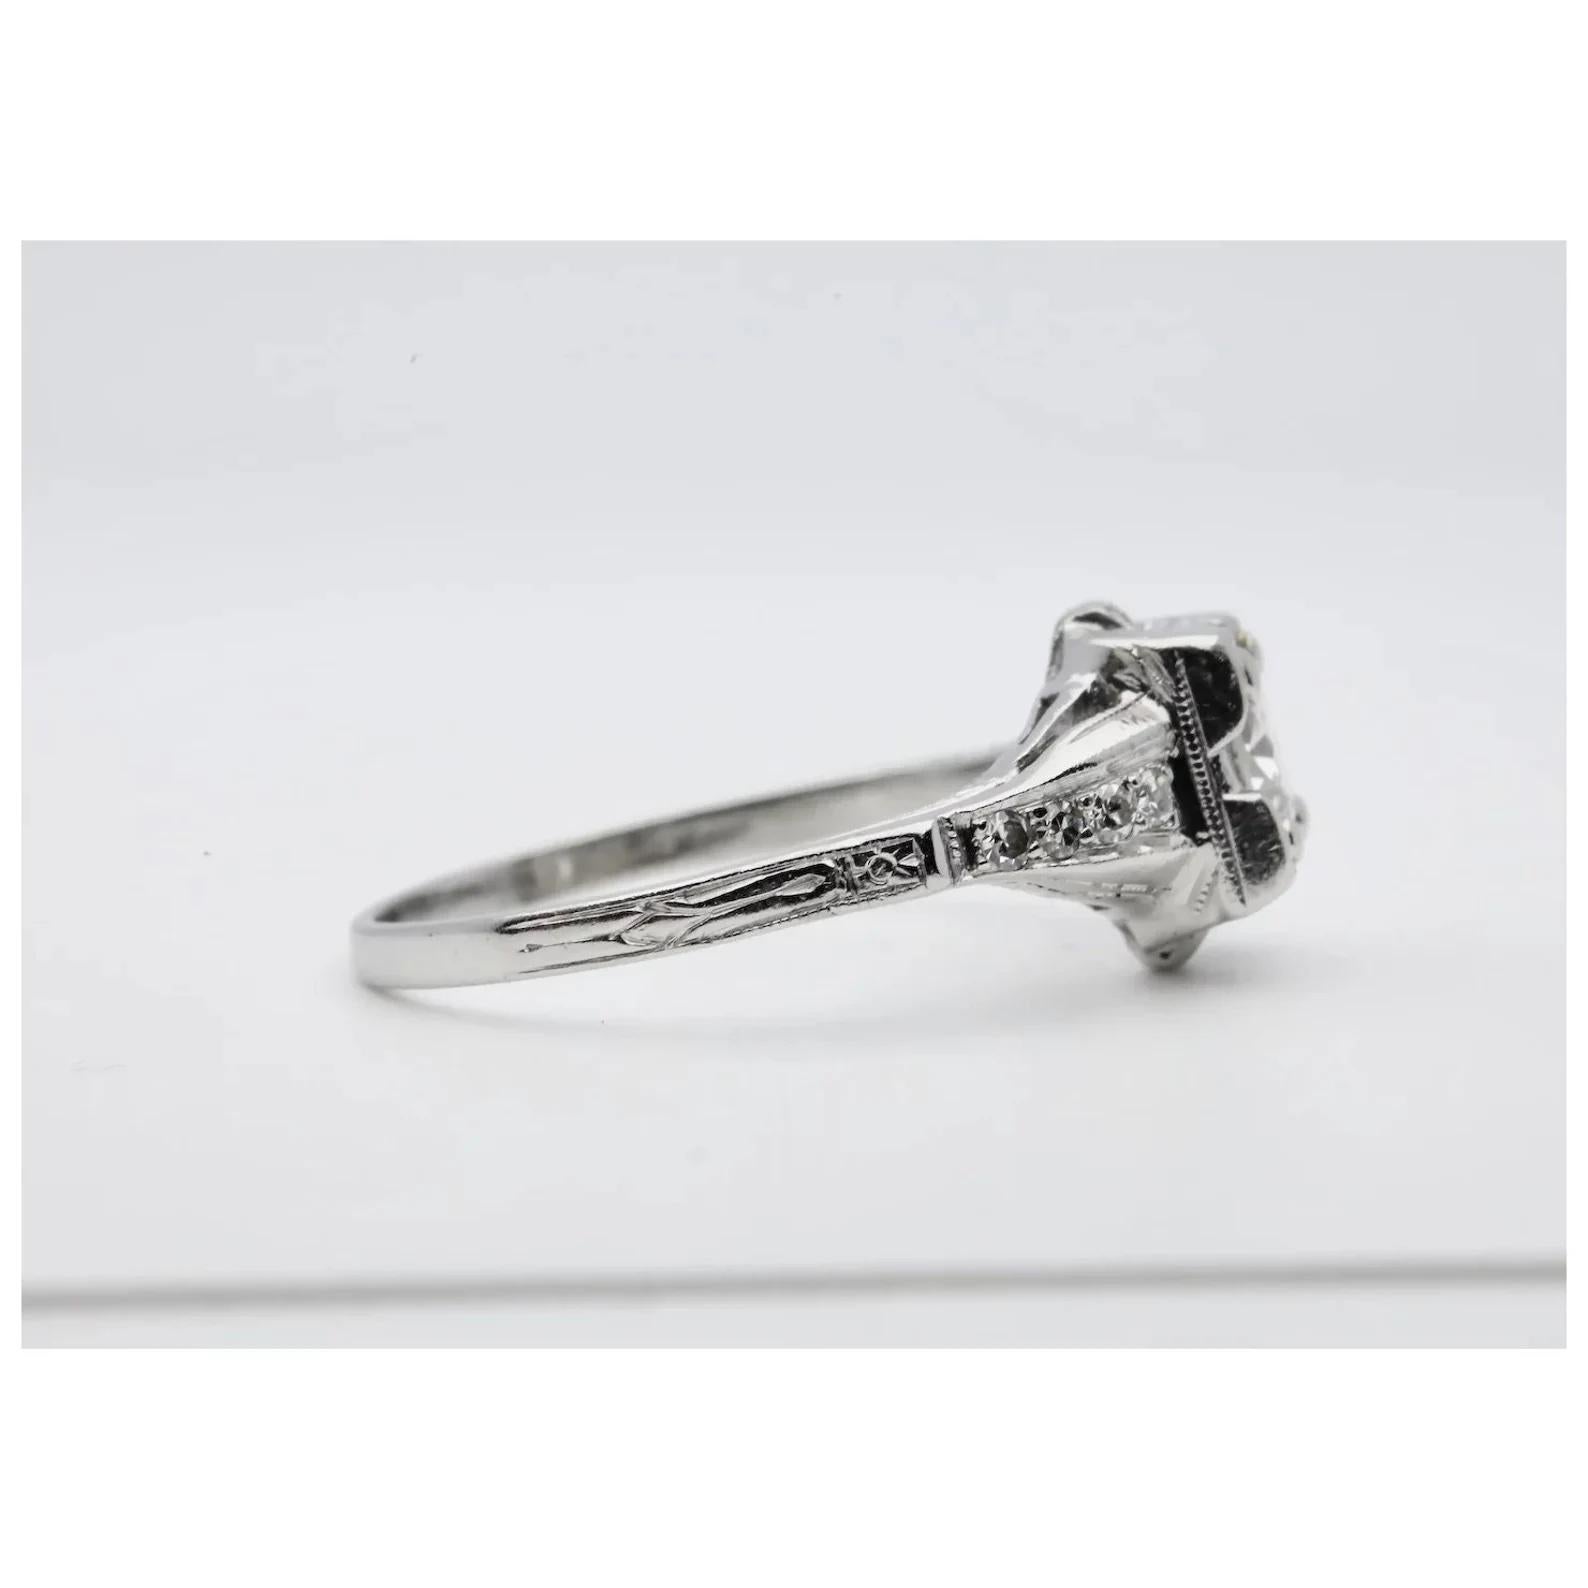 A handmade Art Deco period diamond engagement ring crafted in platinum. Centered by a 0.55 carat Old European cut center diamond of H color and VS2 clarity. Accenting this ring are an additional eight pave set diamonds weighing a combined 0.08